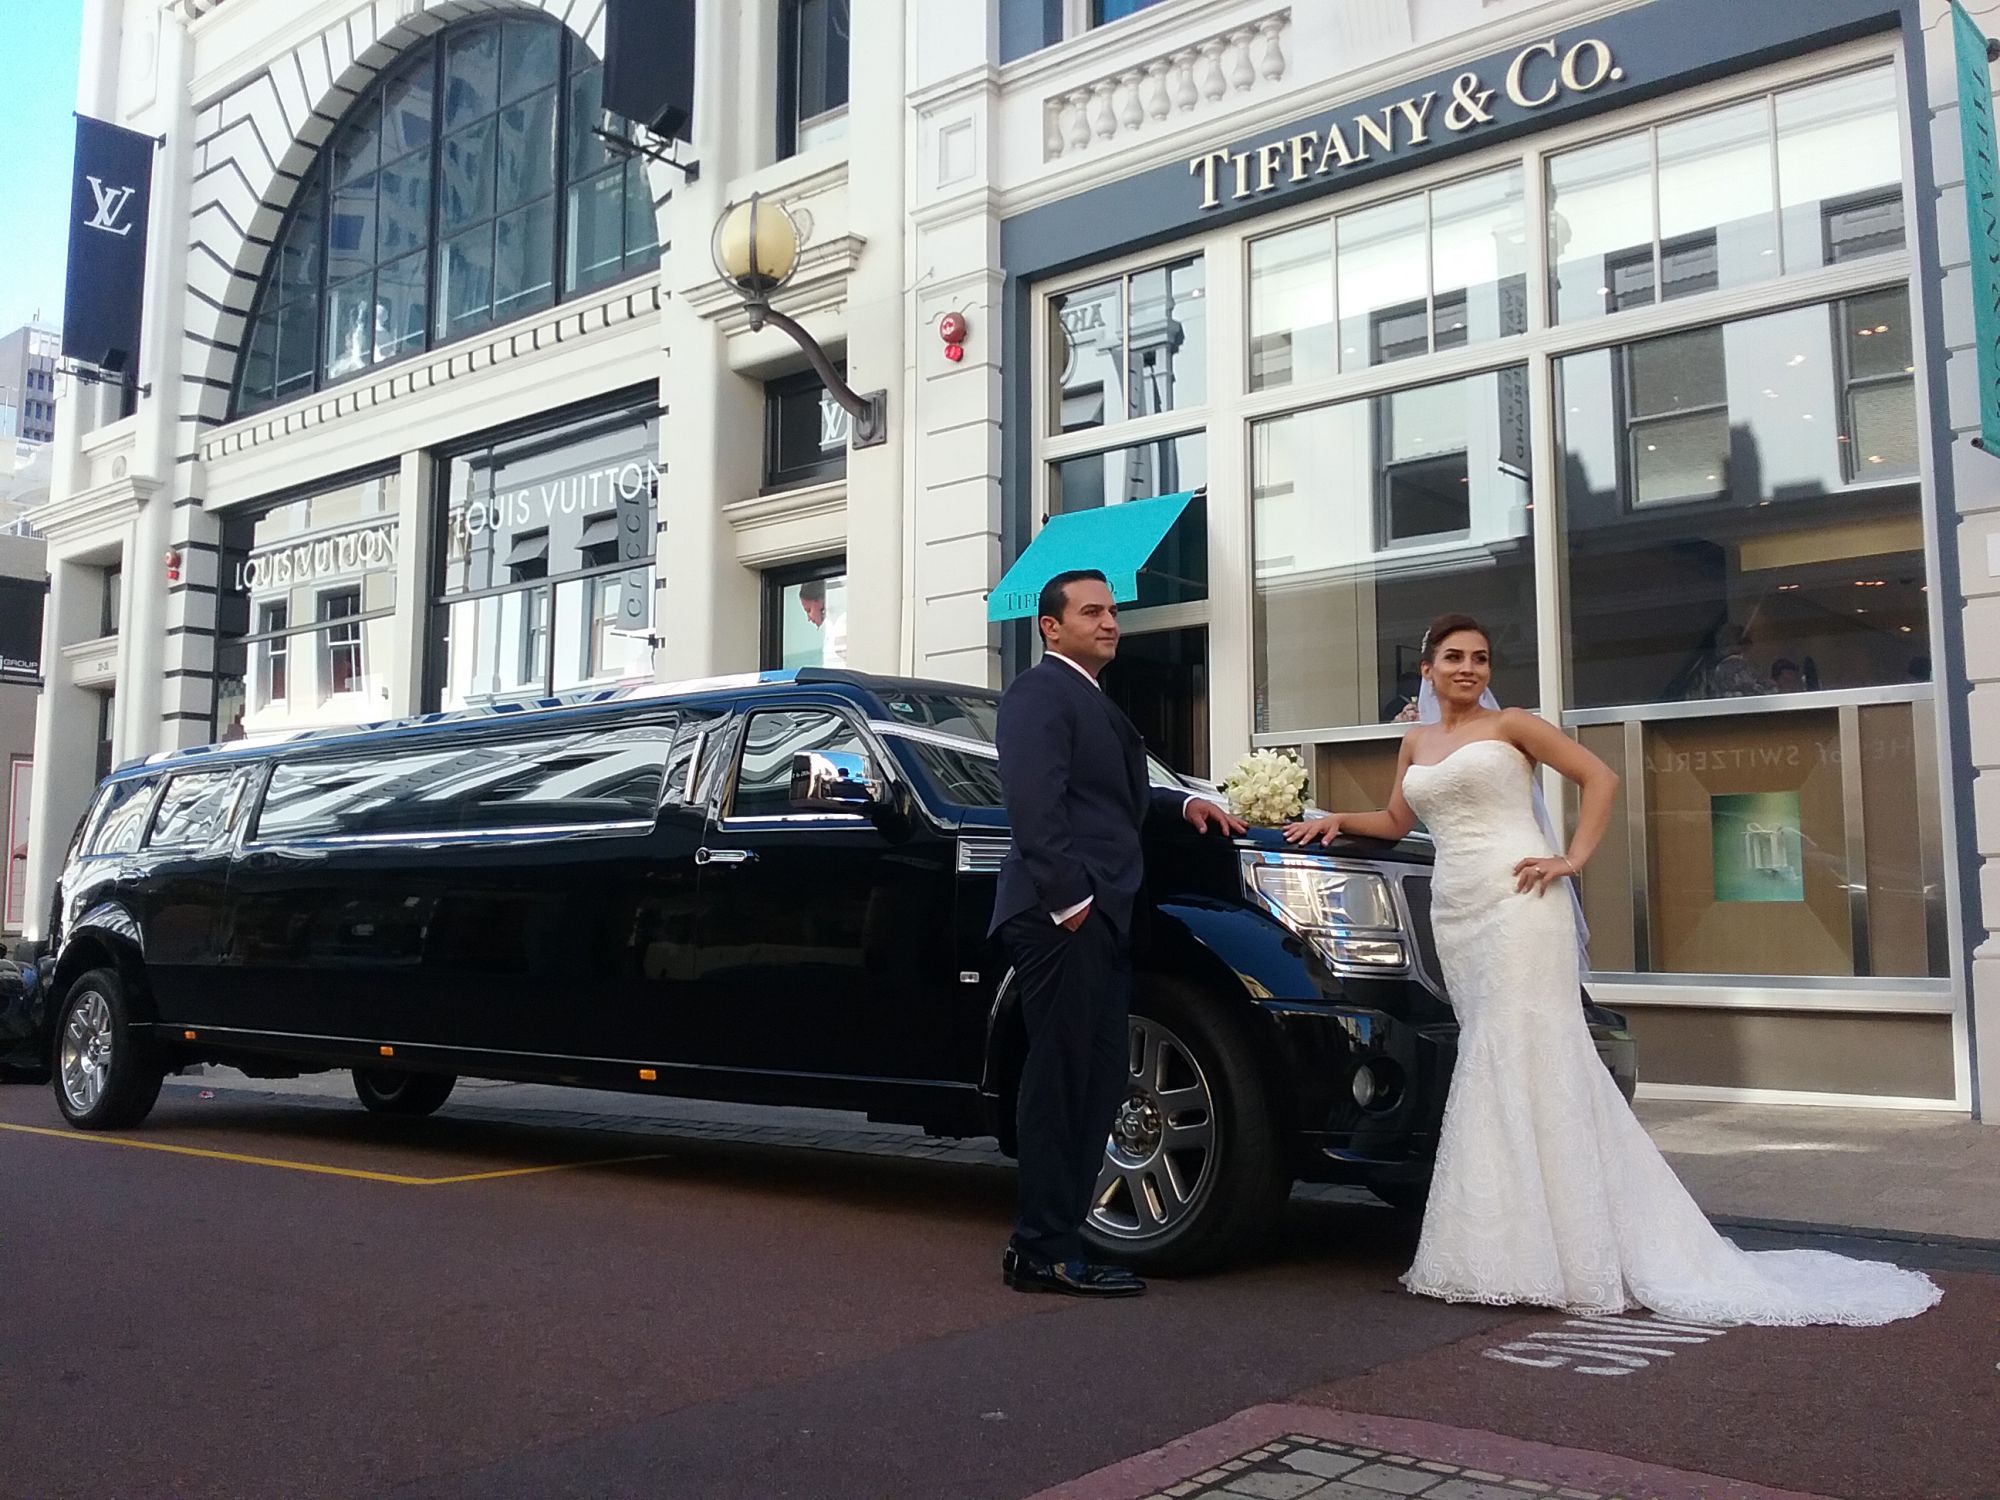 Bling Limousines Hire Perth 